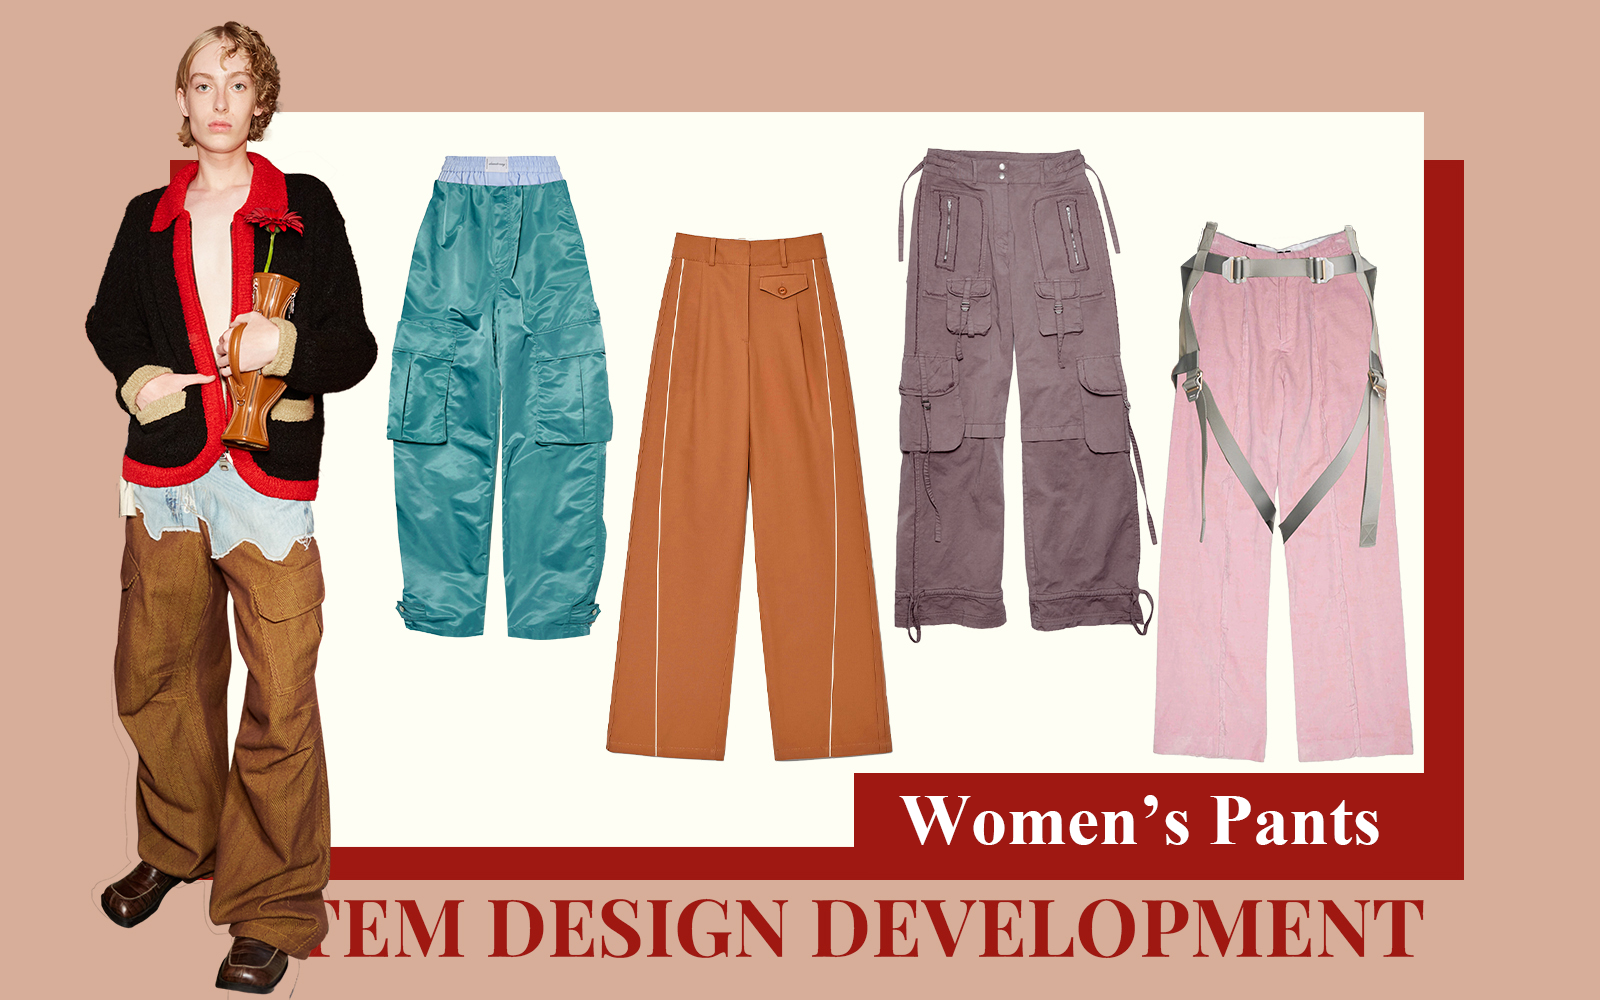 Chic Casual -- The Design Development of Women's Pants